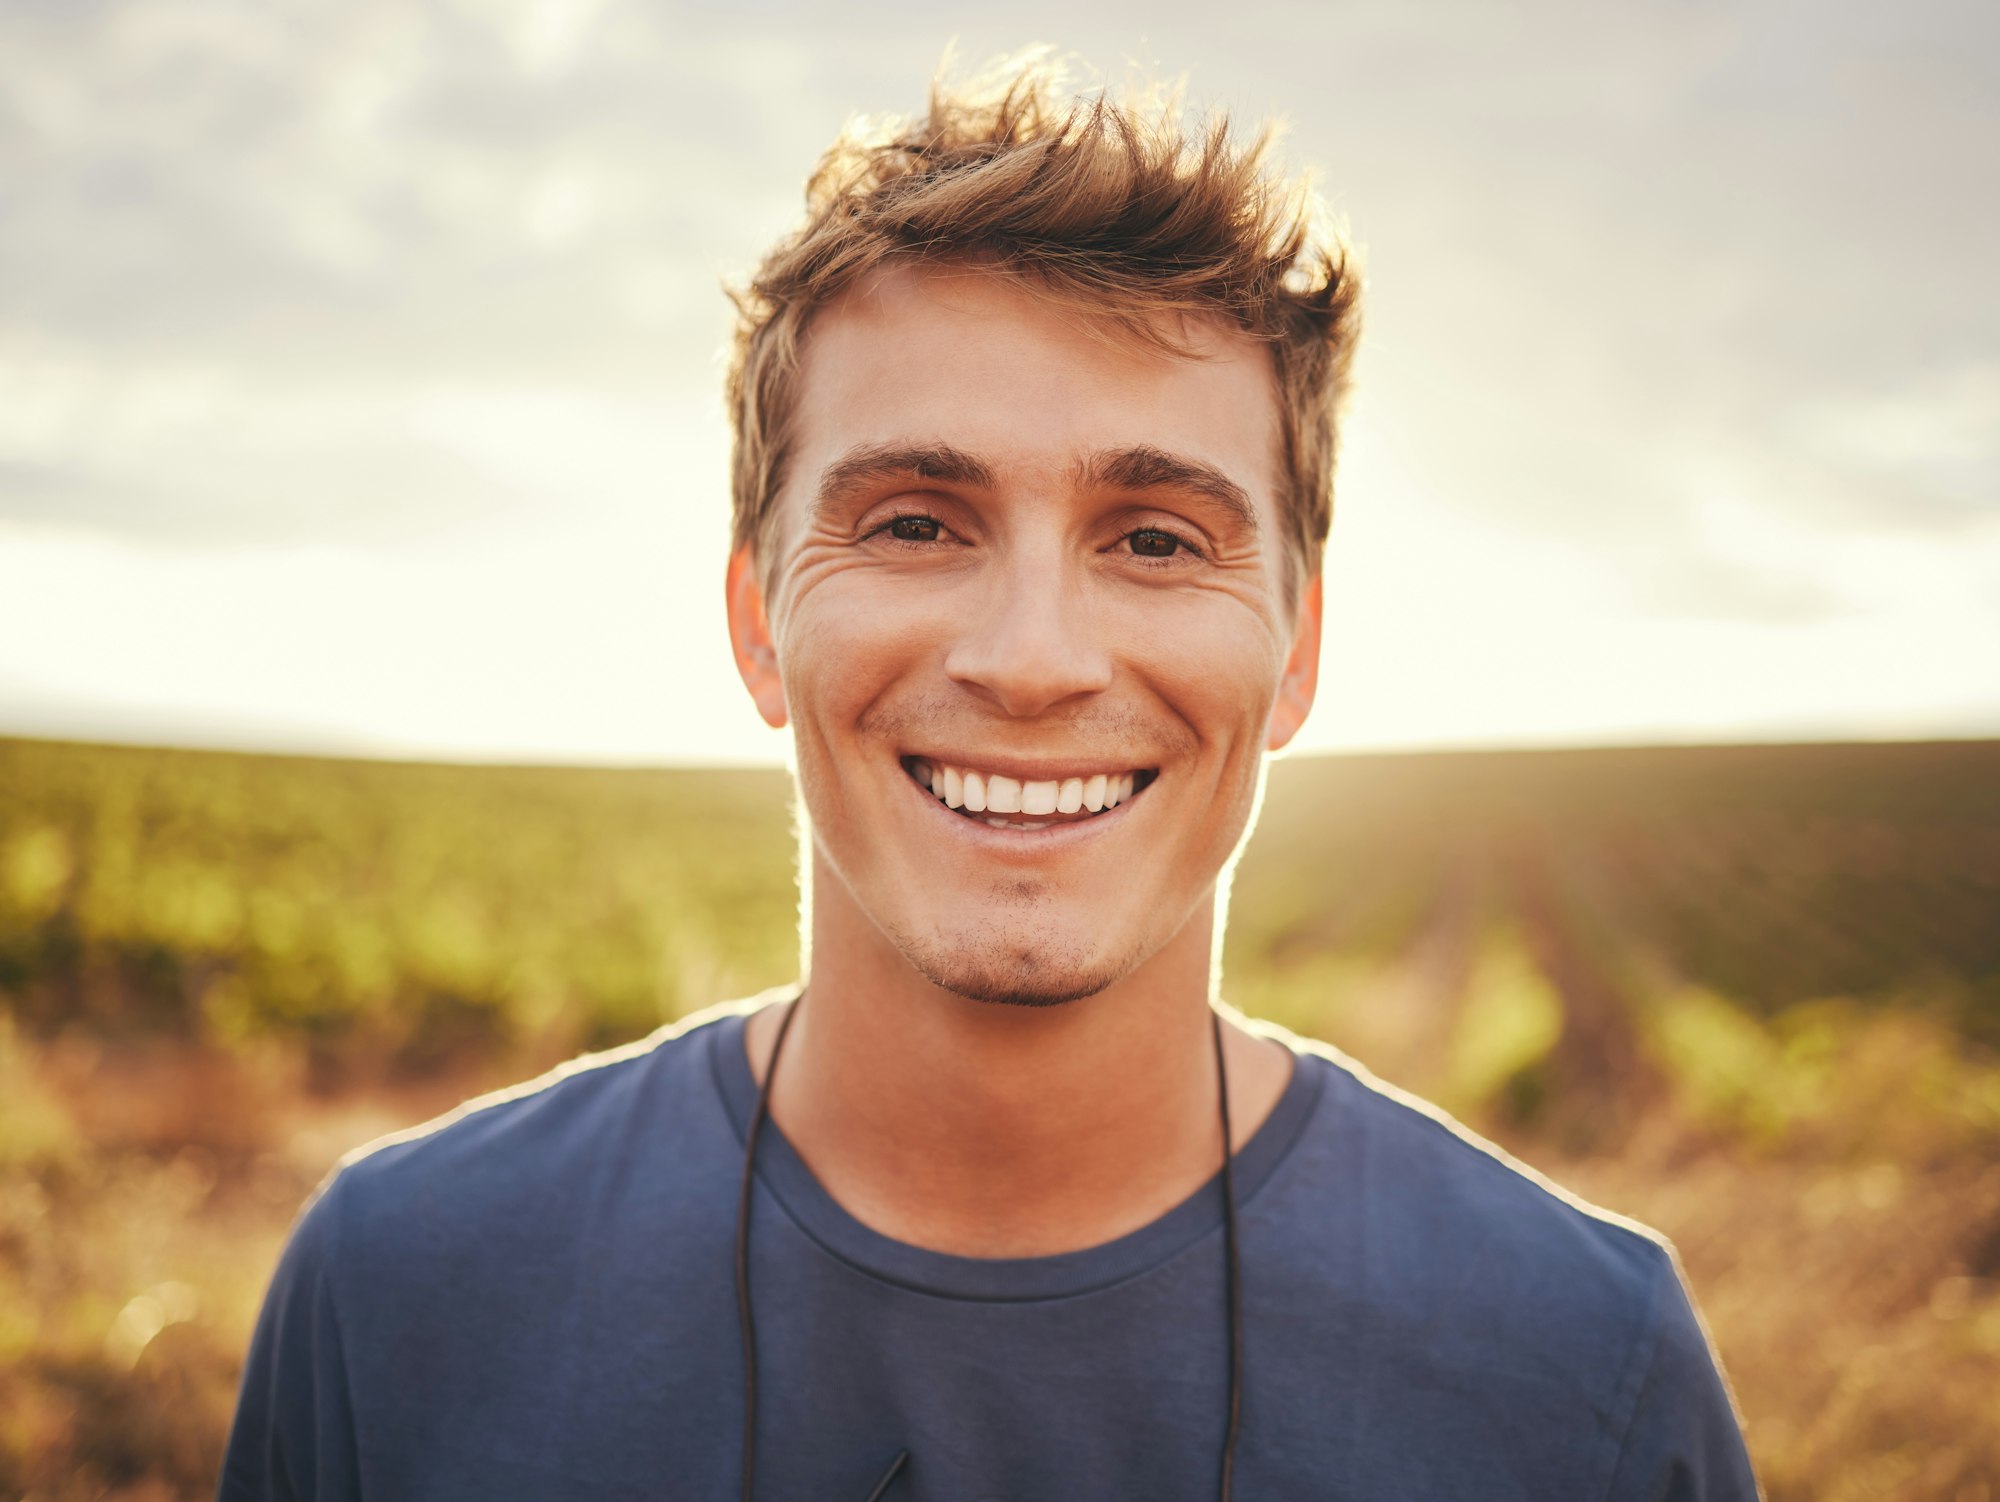 Happy, face and nature with a man at sunset, enjoying freedom with a smile and standing on a field